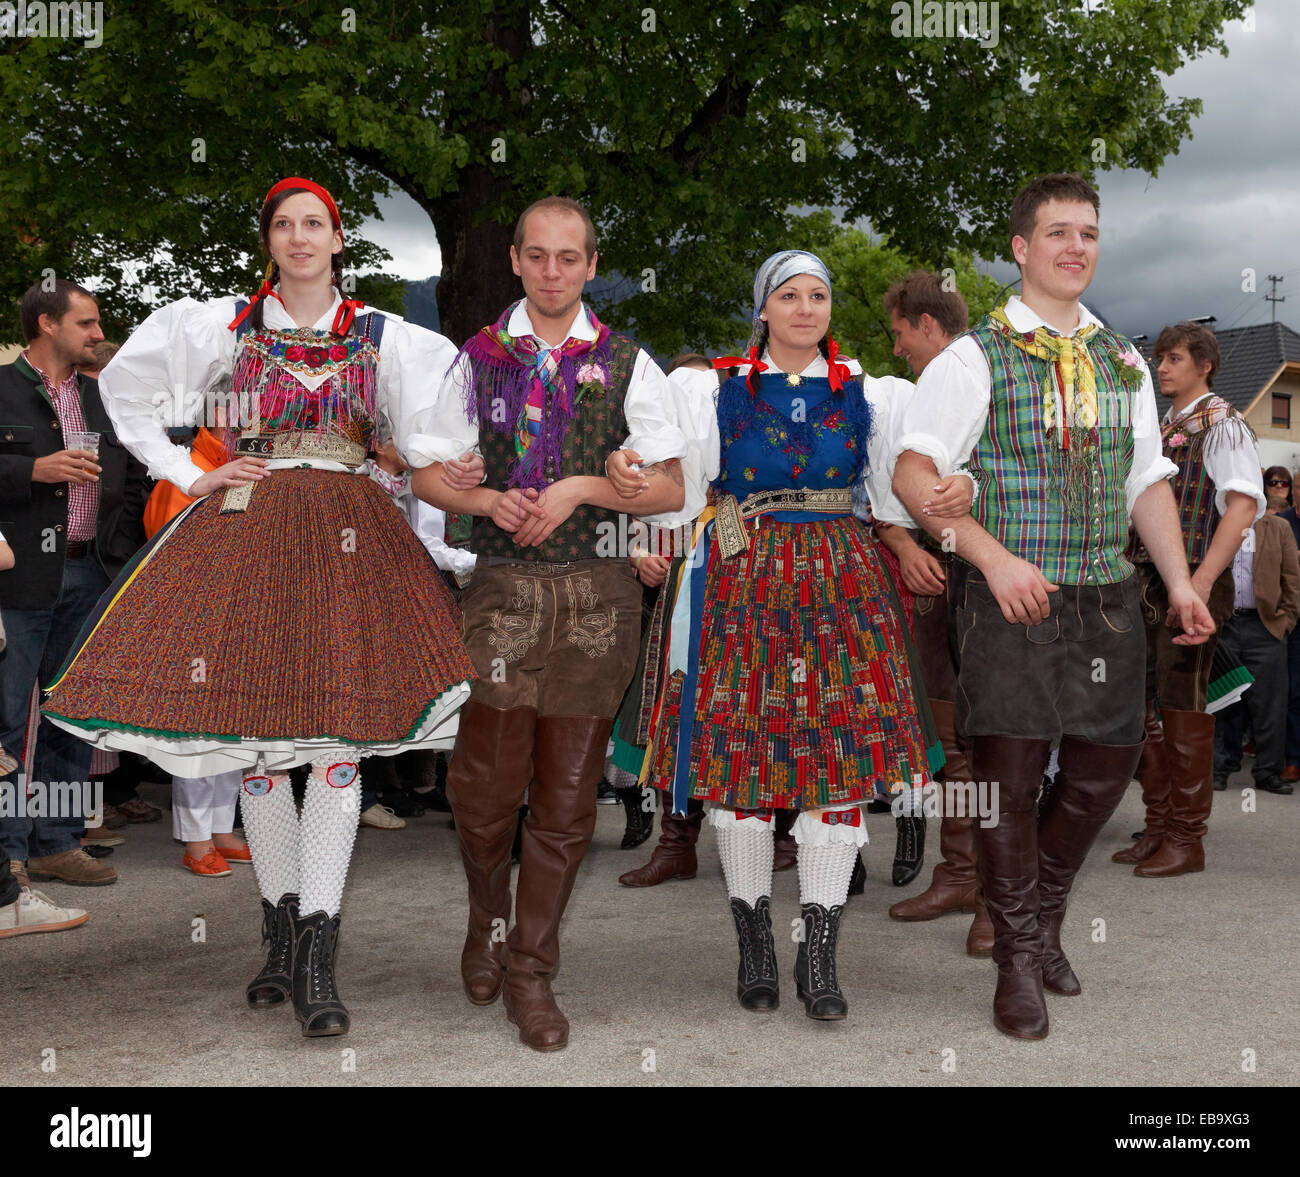 Men and women wearing traditional costumes from the Gailtal valley dancing, Tanz unter der Linde dance, Kufenstechen festival Stock Photo